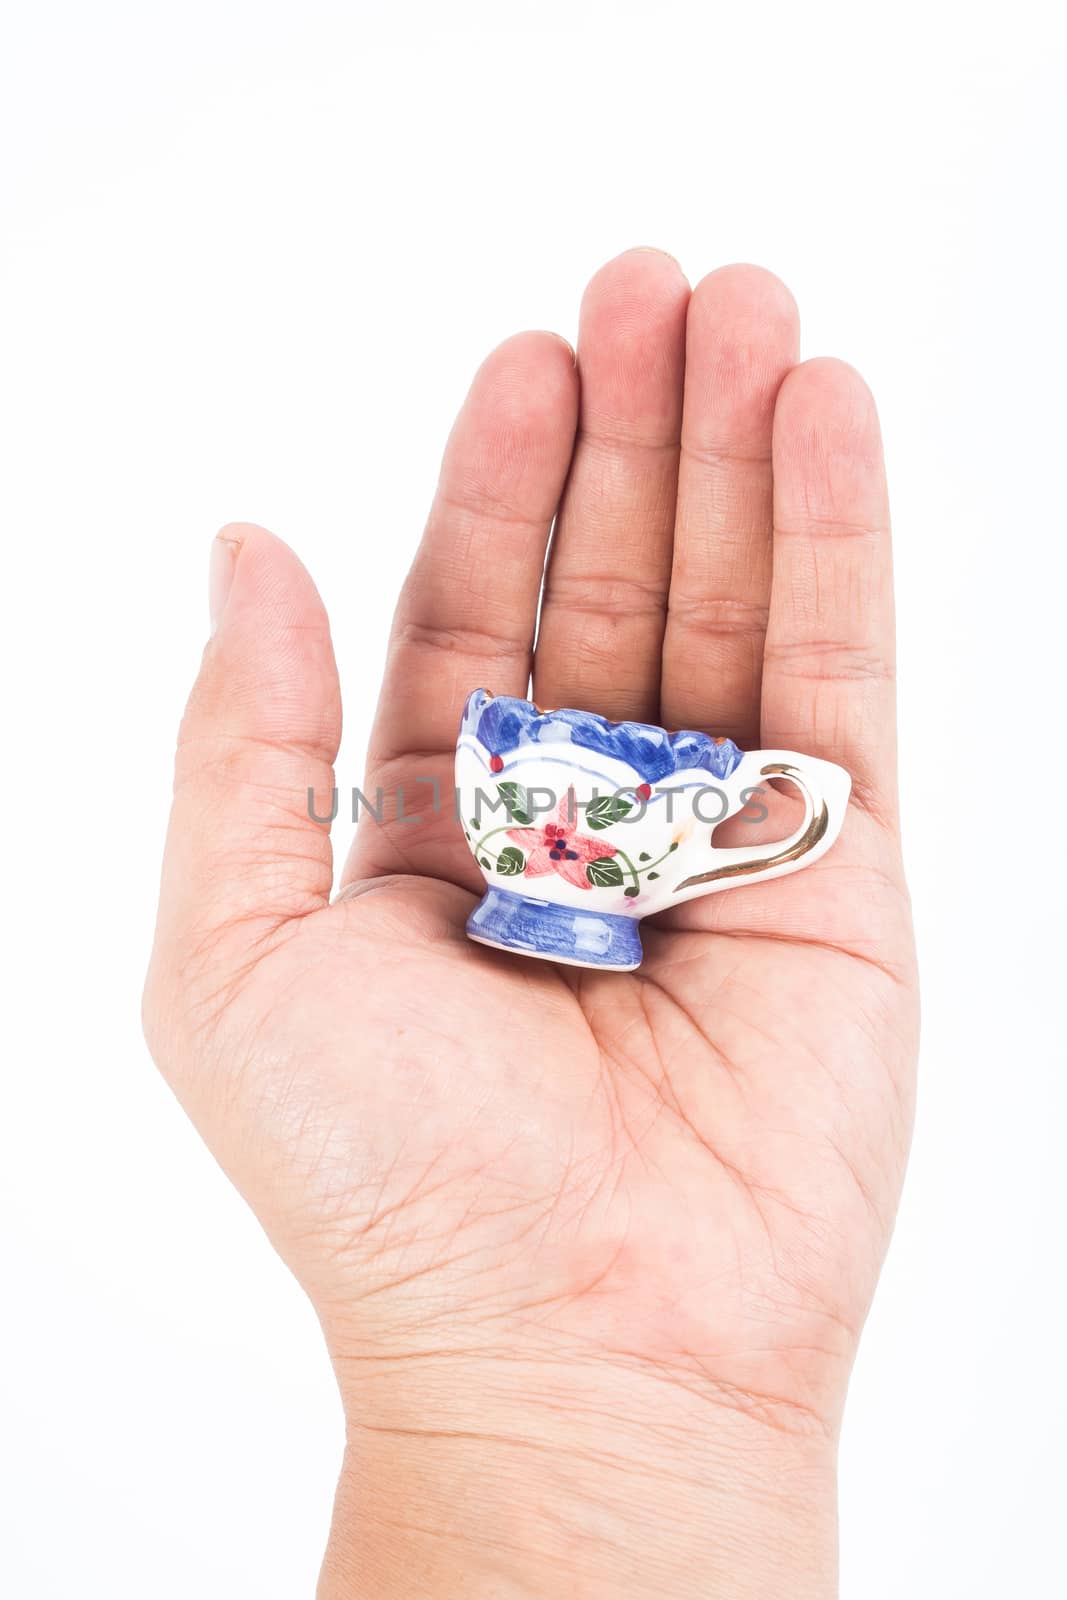 small ceramic cup in hand on white background